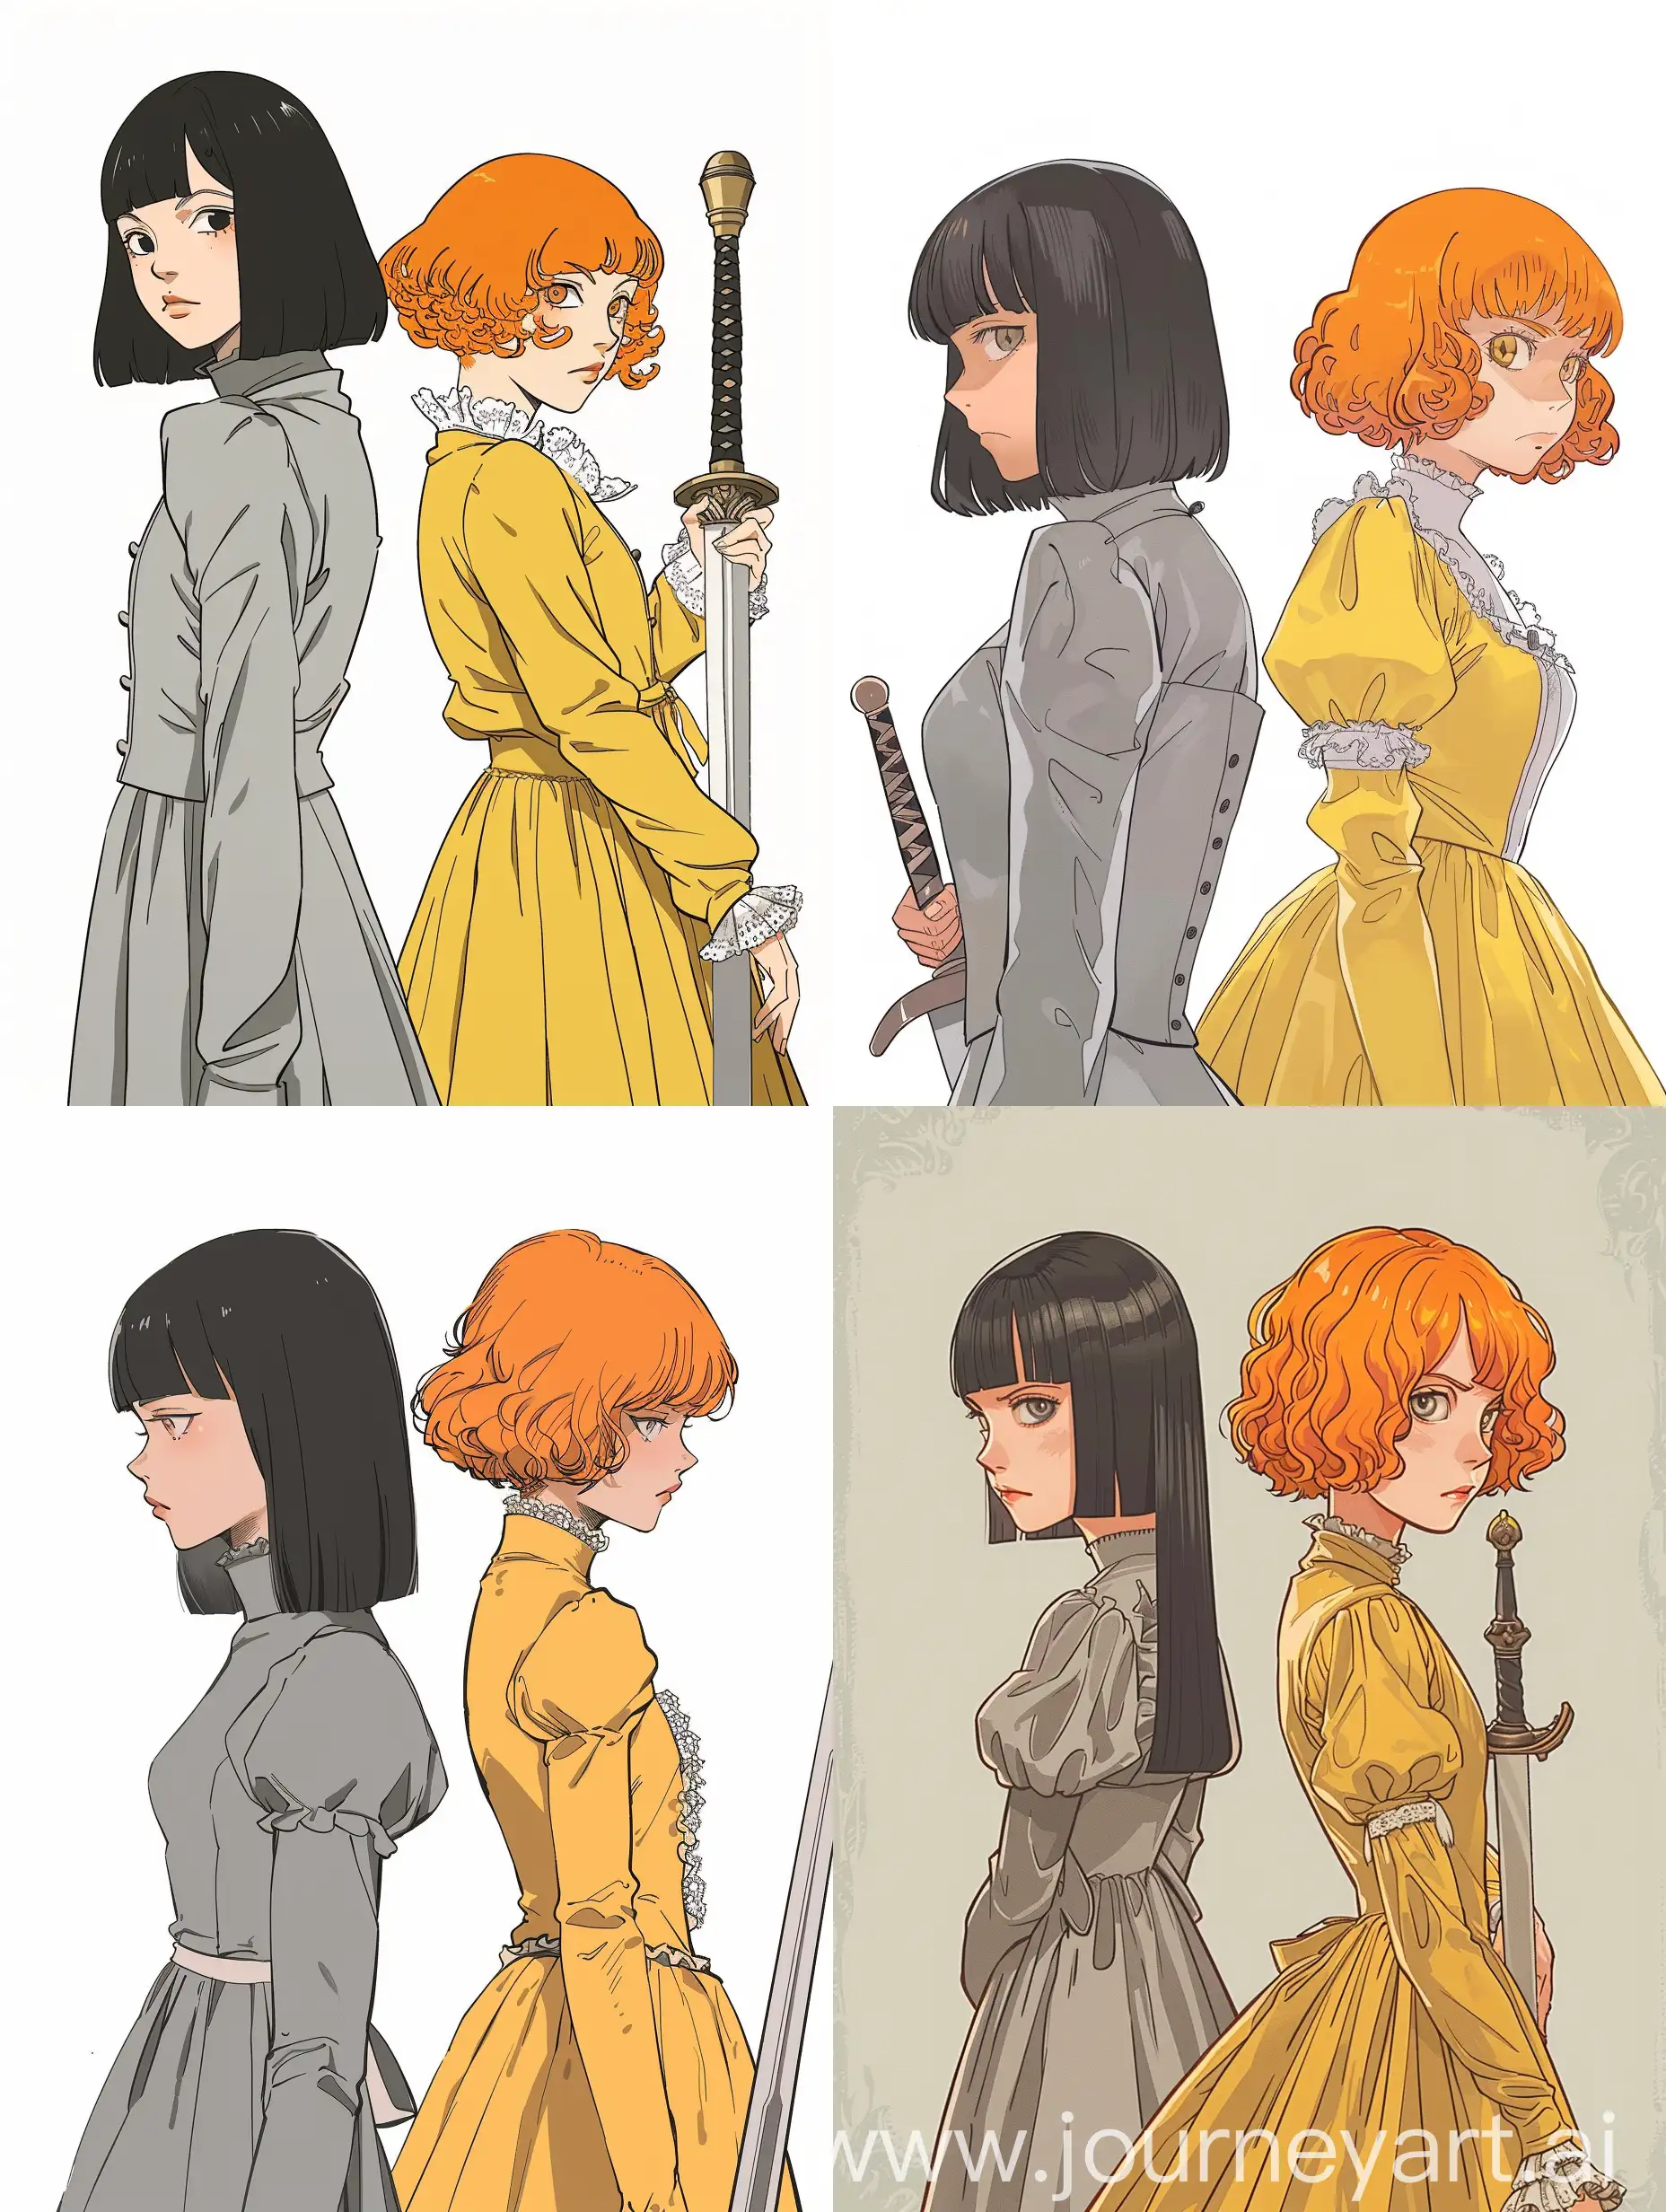 Two girls are standing with their backs to each other. slevo has straight black hair with straight bangs. the dress of Victorian England is gray. On the right, a girl is slightly taller, with short orange hair that curls. She is dressed in a yellow Victorian dress, and in her hands is a sword. make it in the style of a Korean manhwa